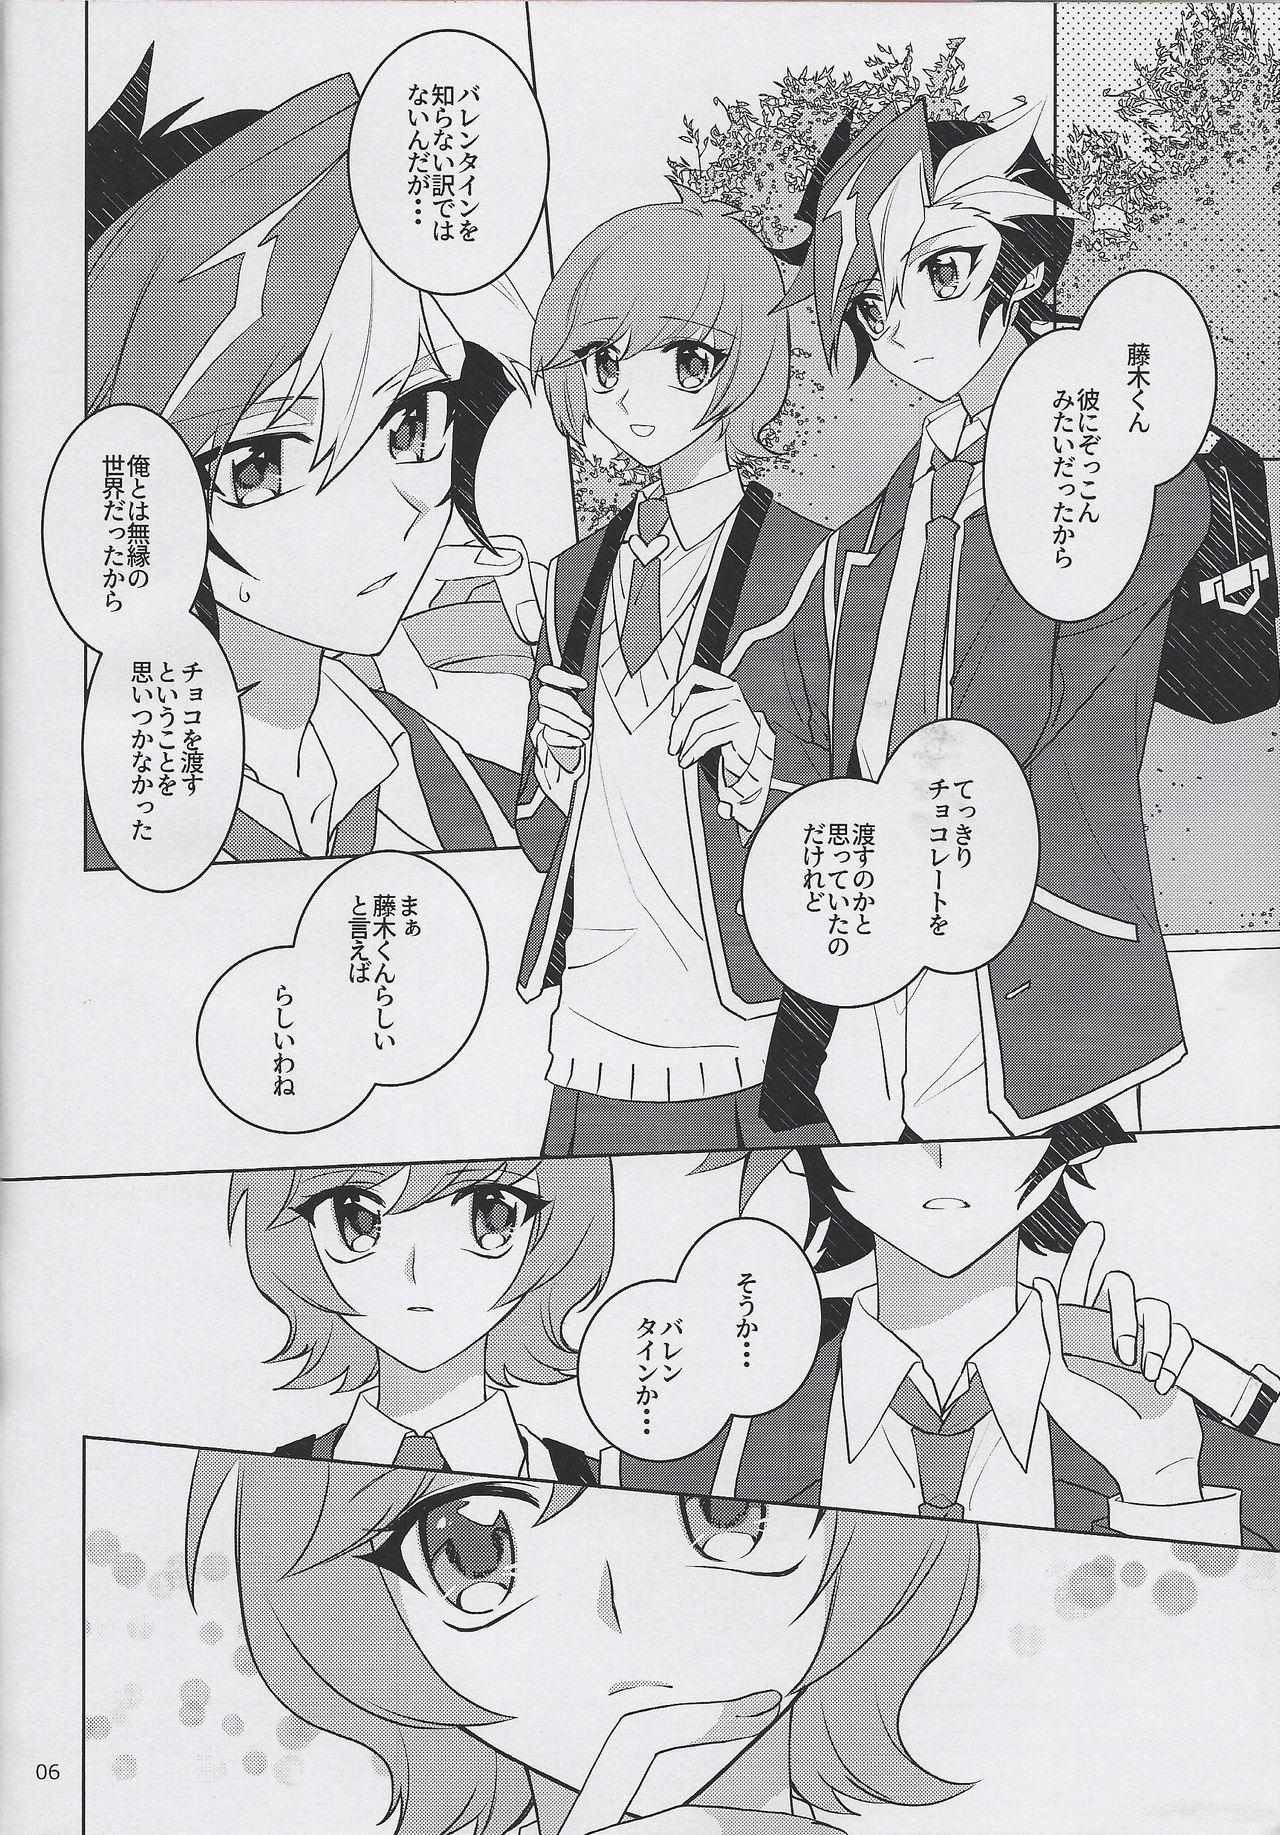 Tanned Unmei no Melty Choco - Yu gi oh vrains Amazing - Page 5